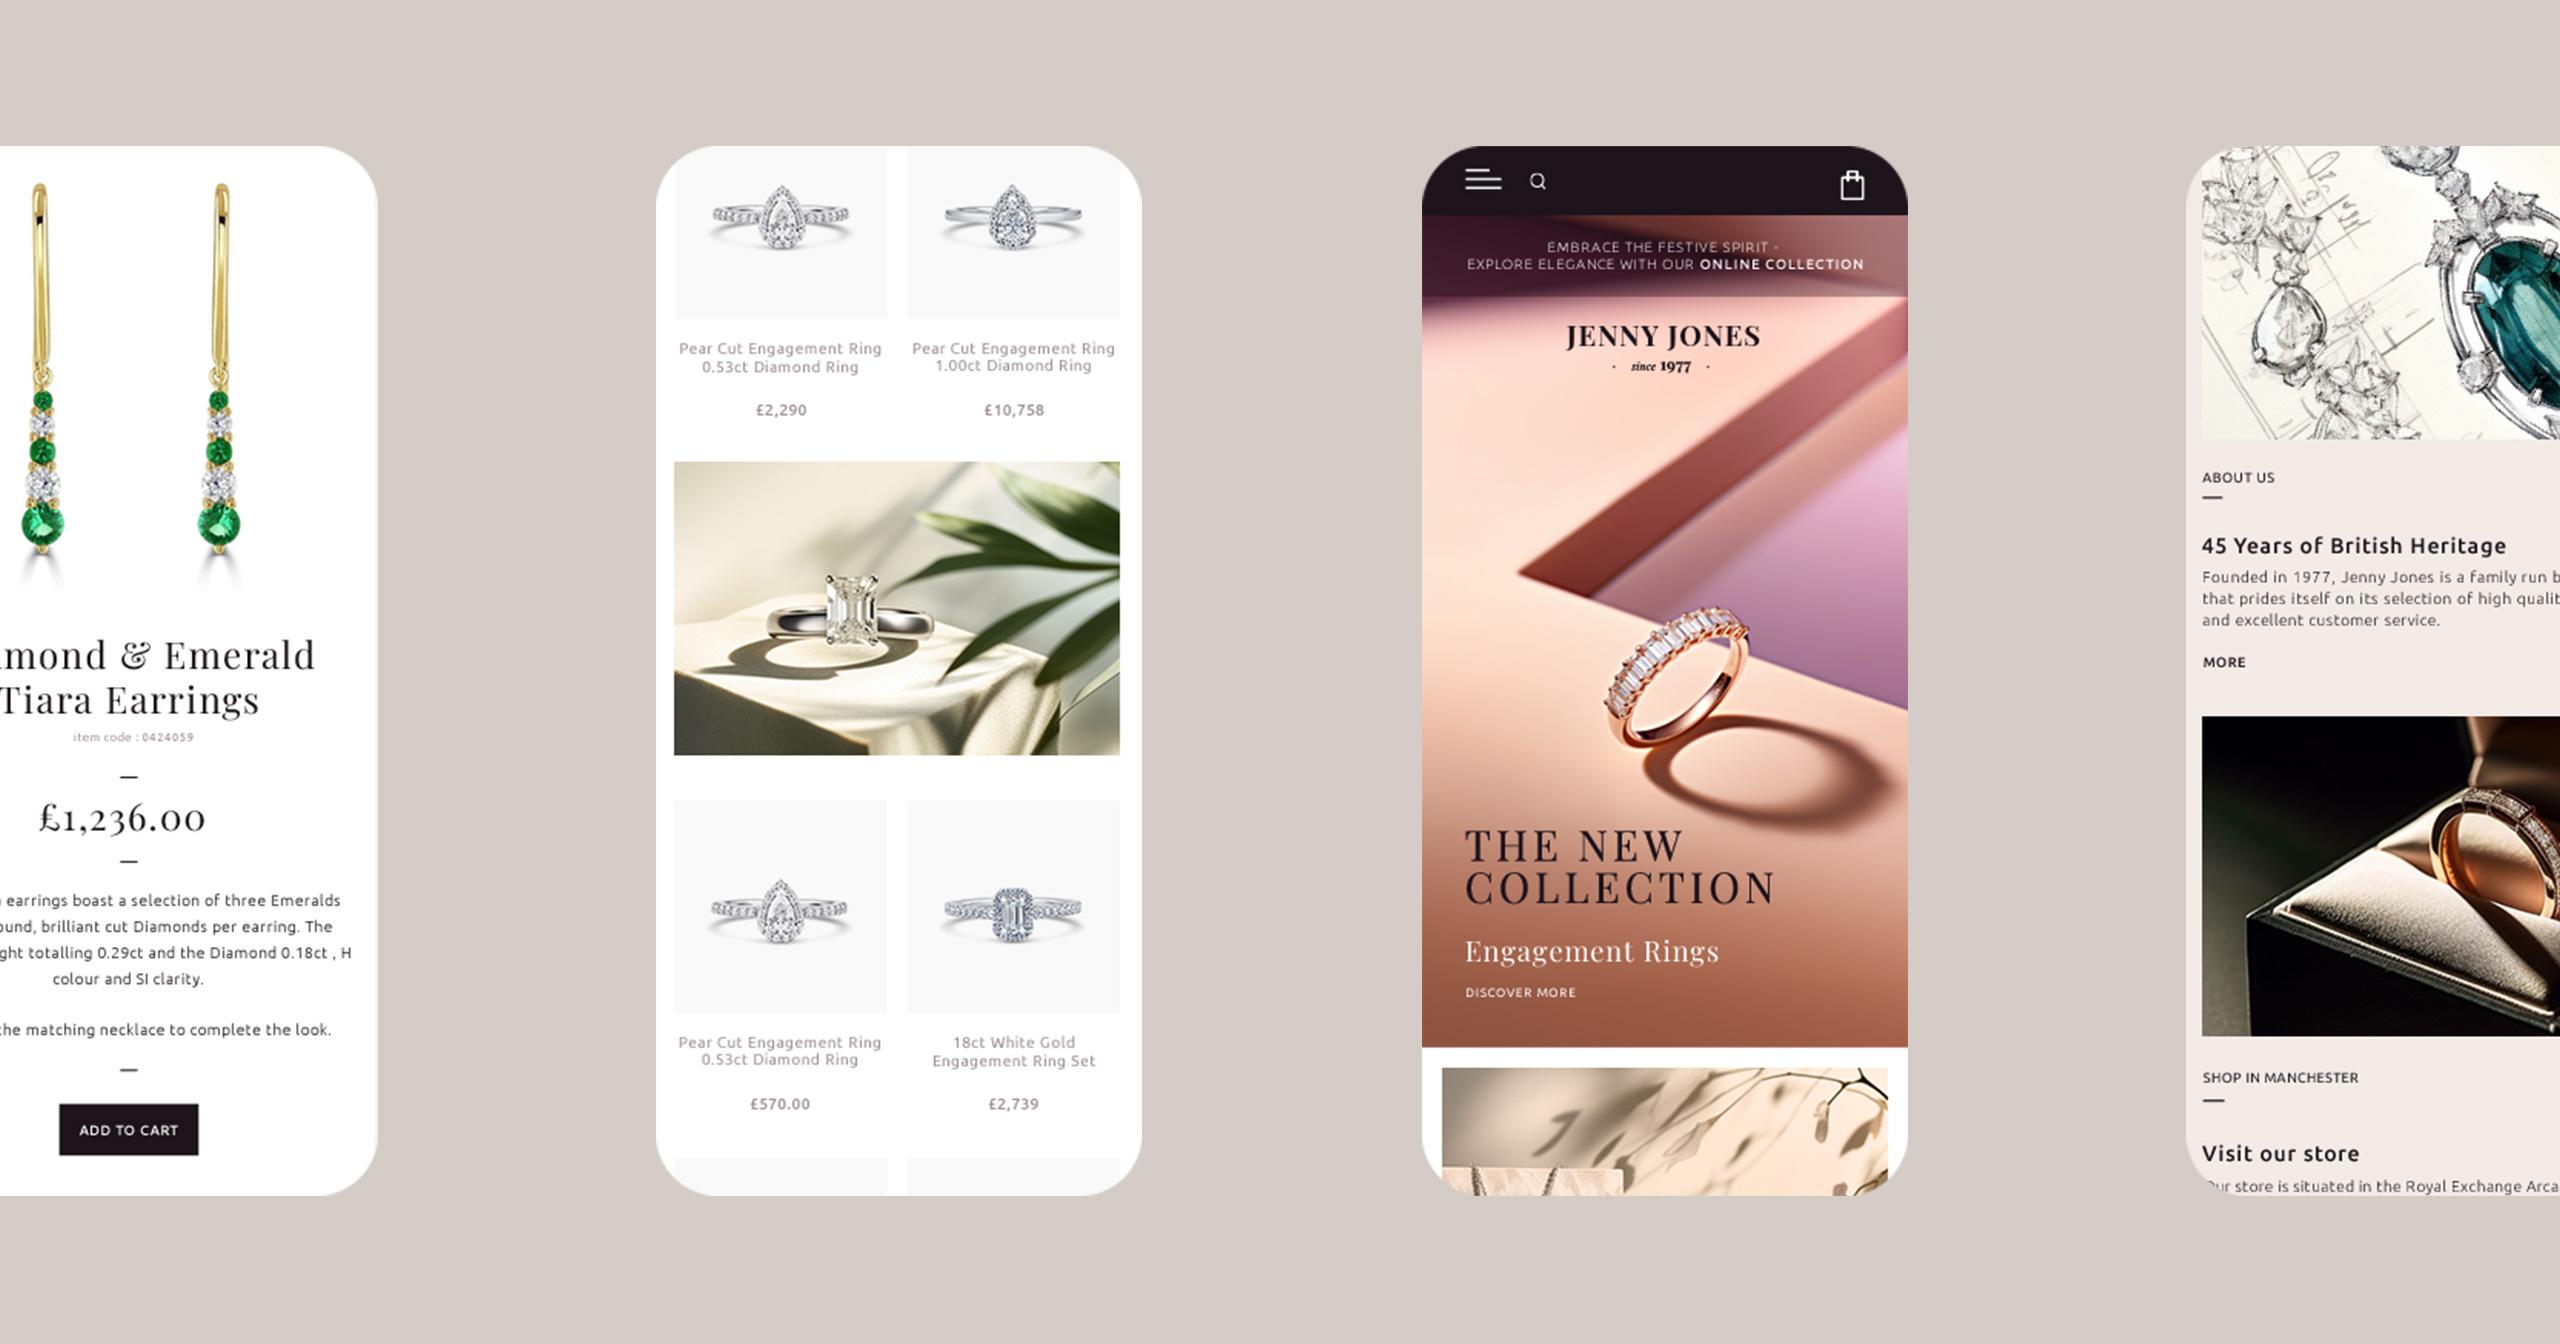 Mobile-first design of Jenny Jones Jewellery website highlighting responsive e-commerce features